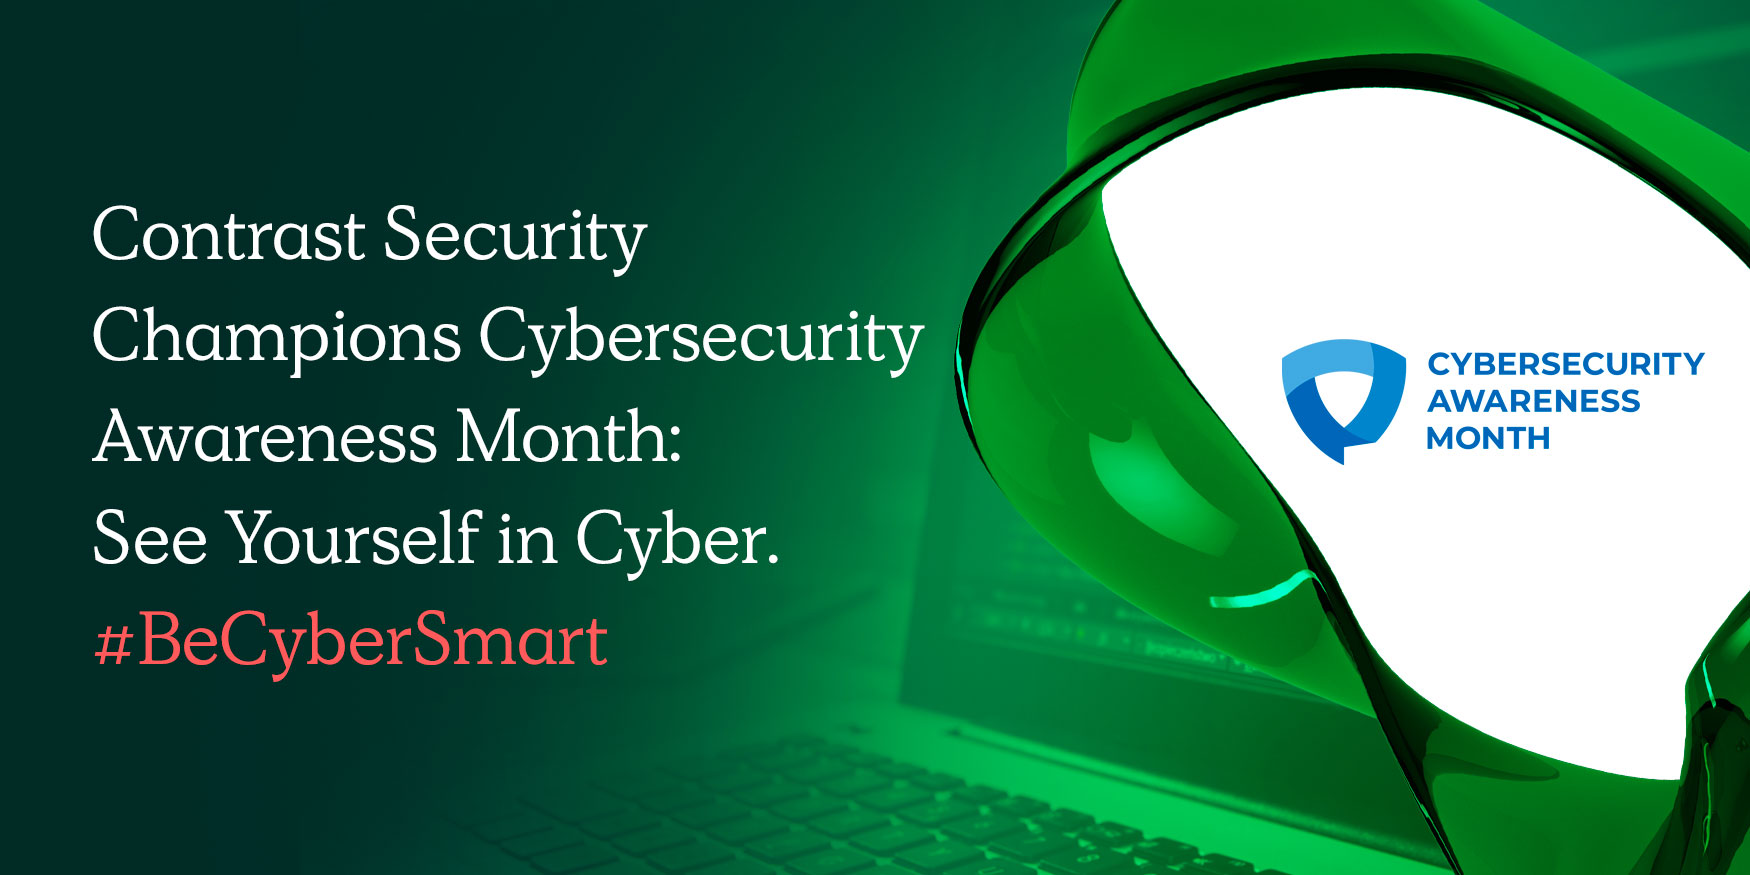 Contrast Security champions Cybersecurity Awareness Month